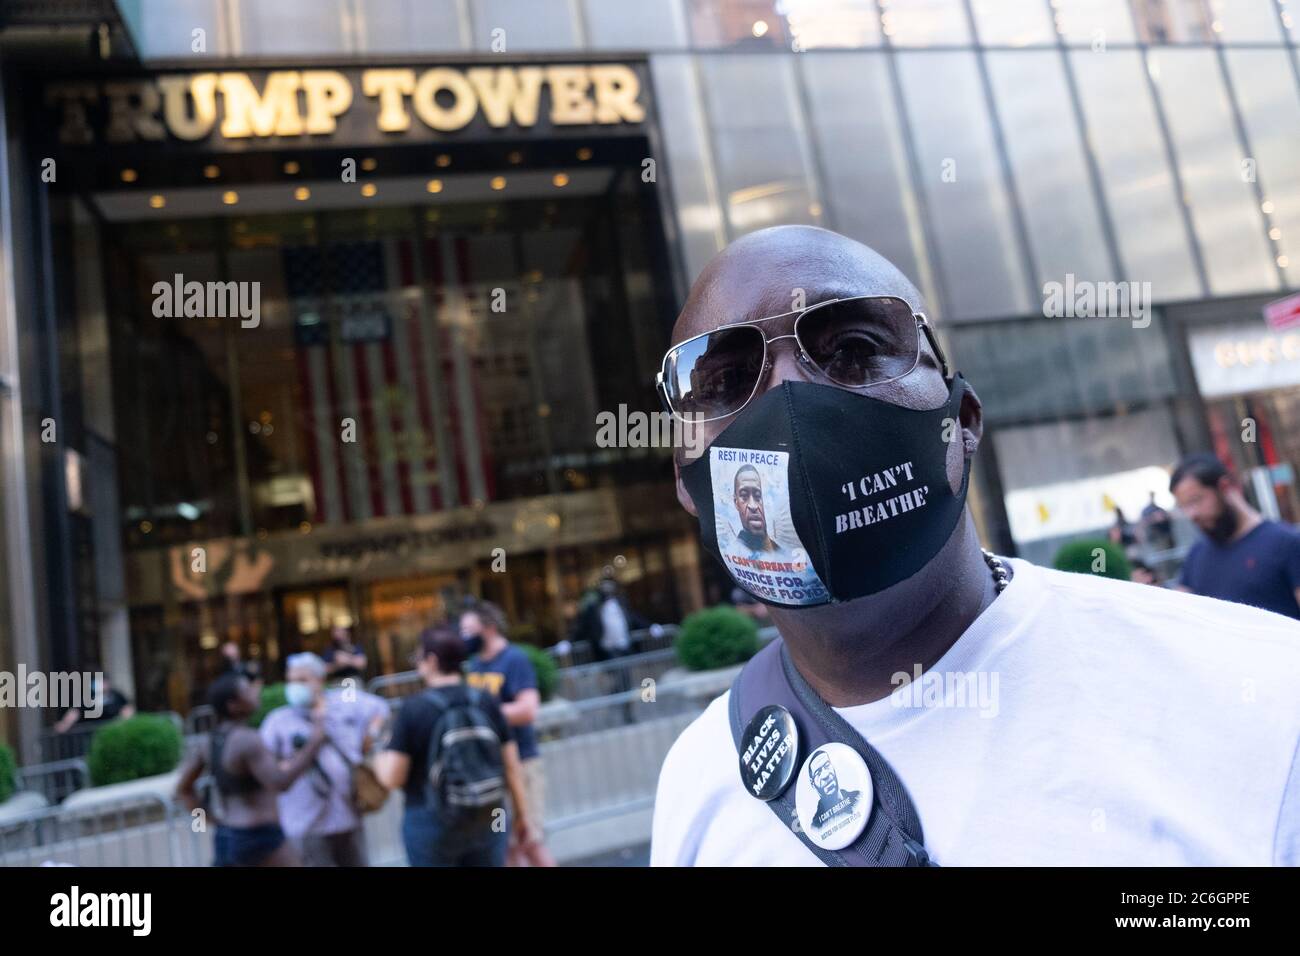 New York, United States. 08th July, 2020. A man wears a face mask with a portrait of George Floyd and the message 'I can't breath' in front of Trump Tower where a large Black Lives Matter mural was painted.As New York City enters phase 3 of reopening retail stores for indoor shopping, restaurants have been postponed for indoor dinning. Meanwhile Black Lives Matter protests continue in the city as the Mayor along with a group of people painted a large Black Lives Matter mural in front of Trump Tower on 5th Ave. Credit: SOPA Images Limited/Alamy Live News Stock Photo